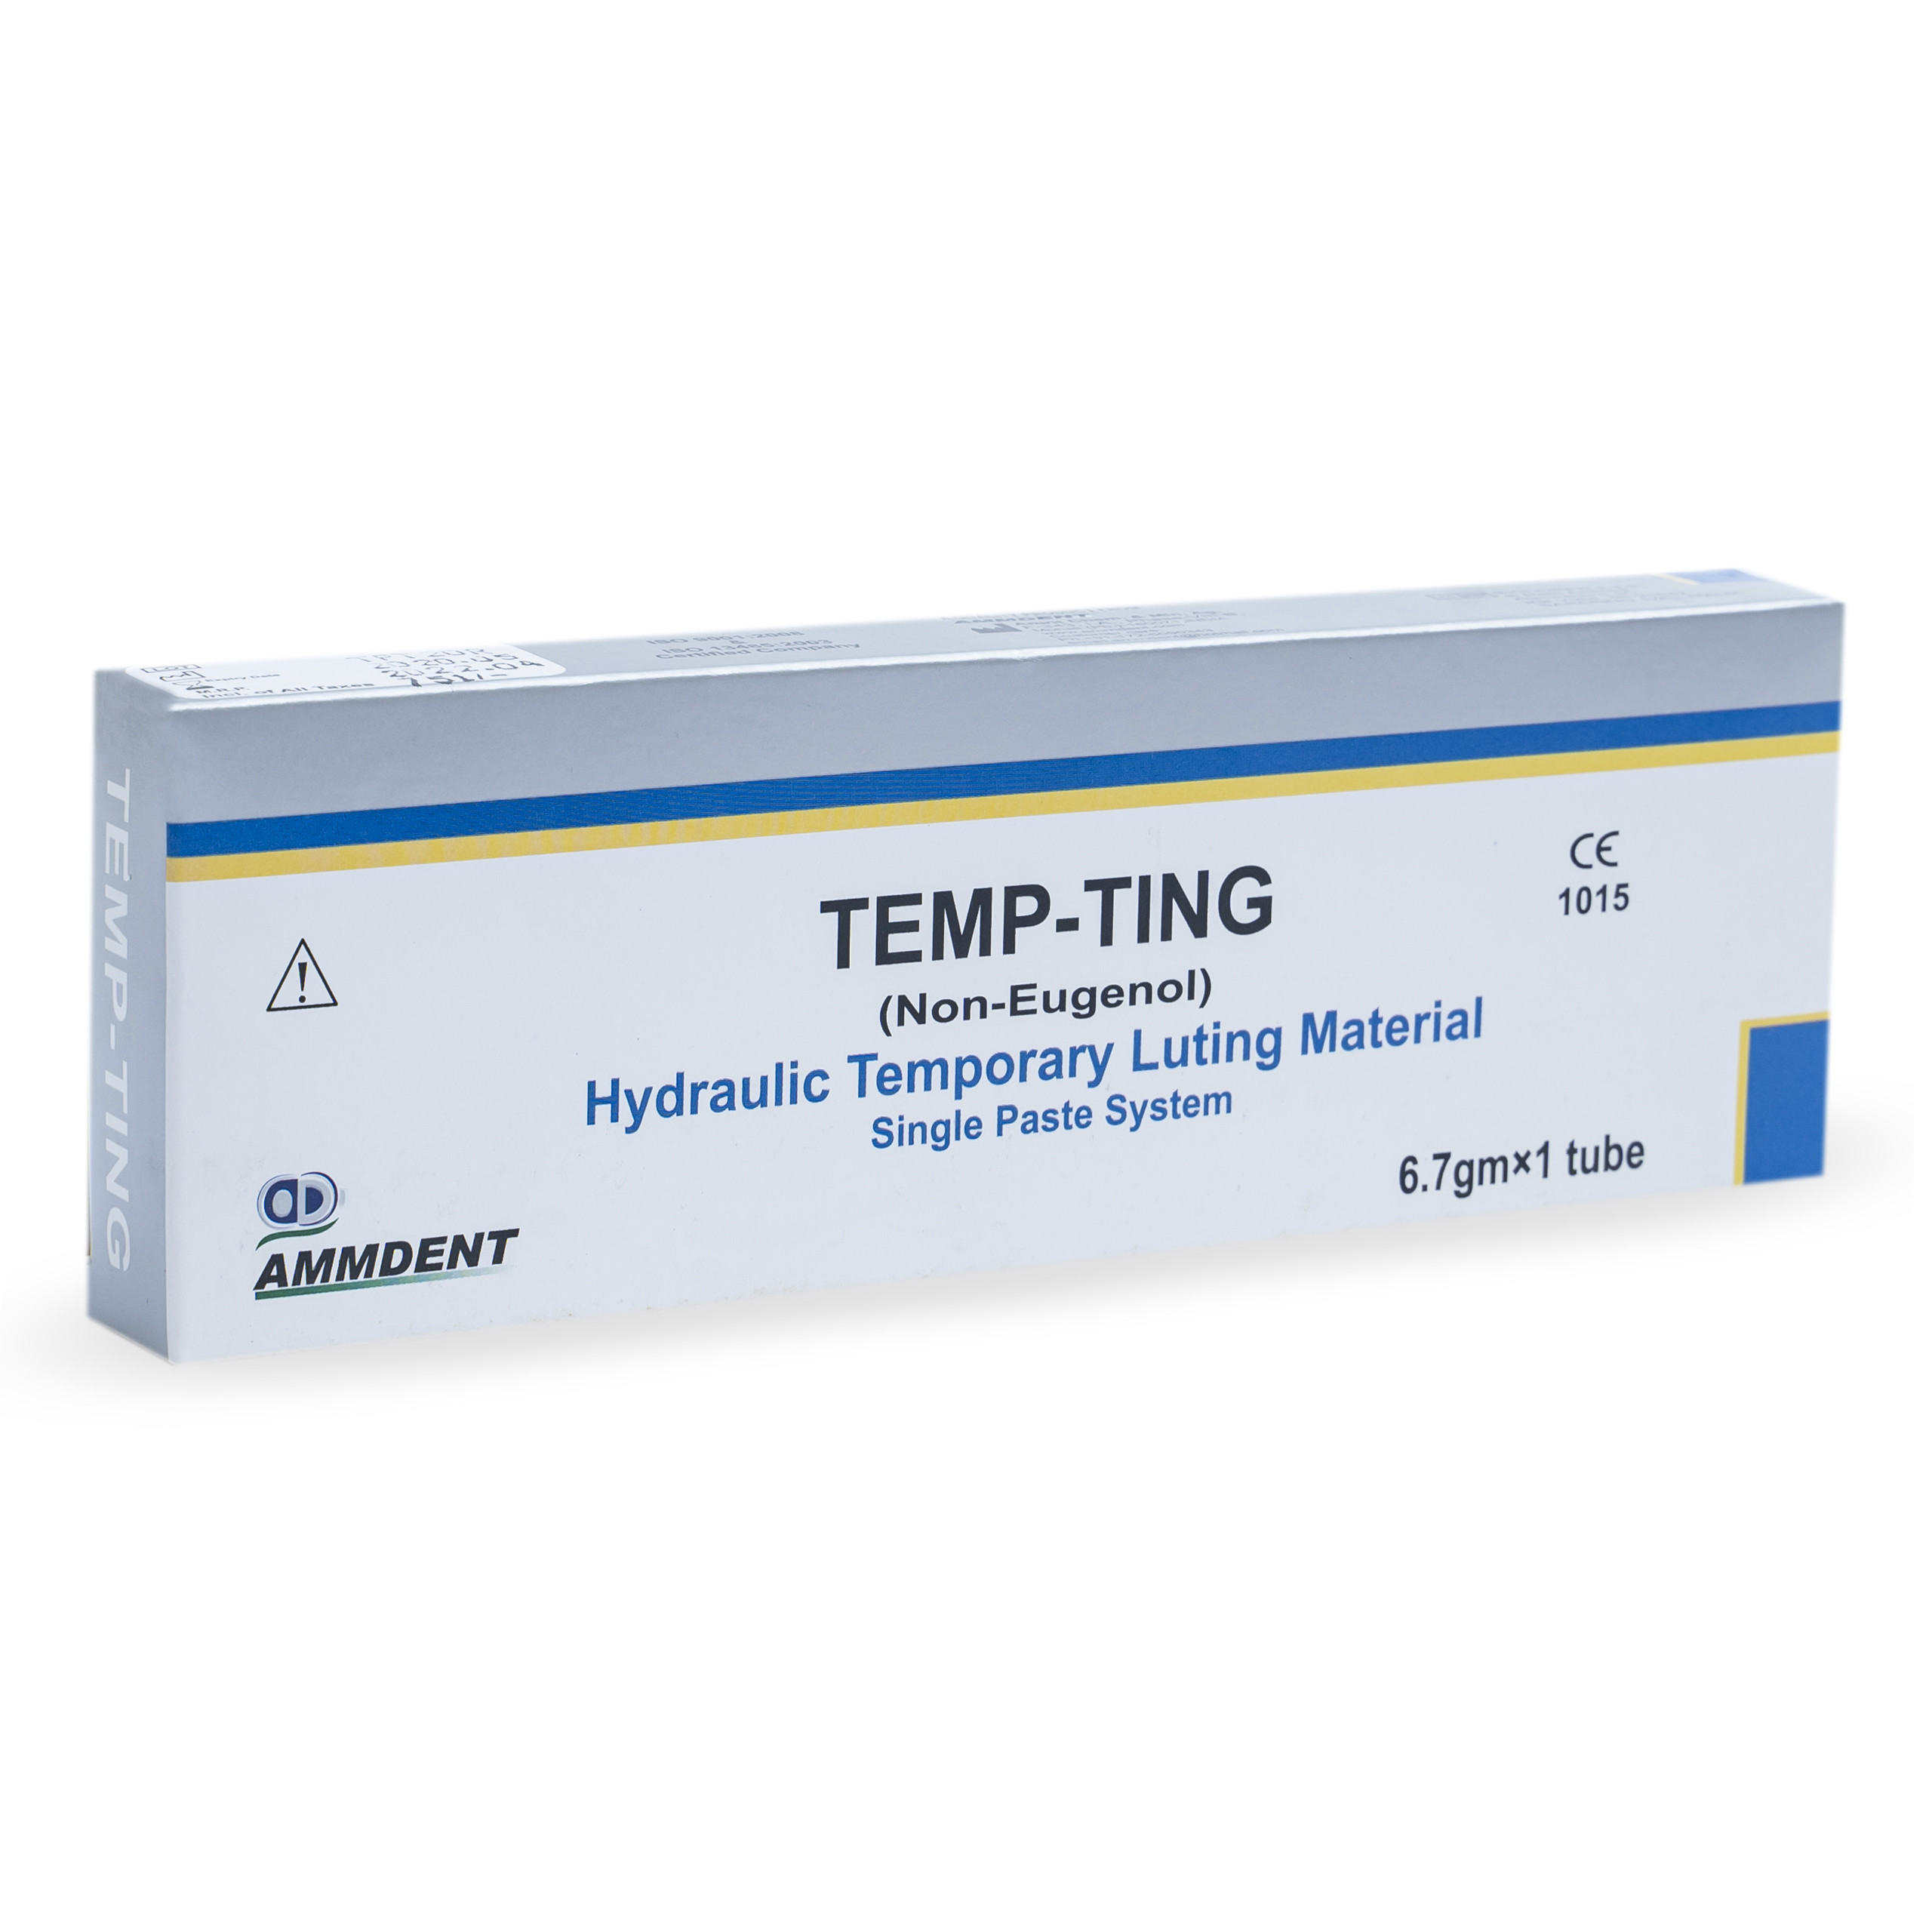 Ammdent Temp-Ting Non Eugenol Temporary Luting Material 6.7gm Tube